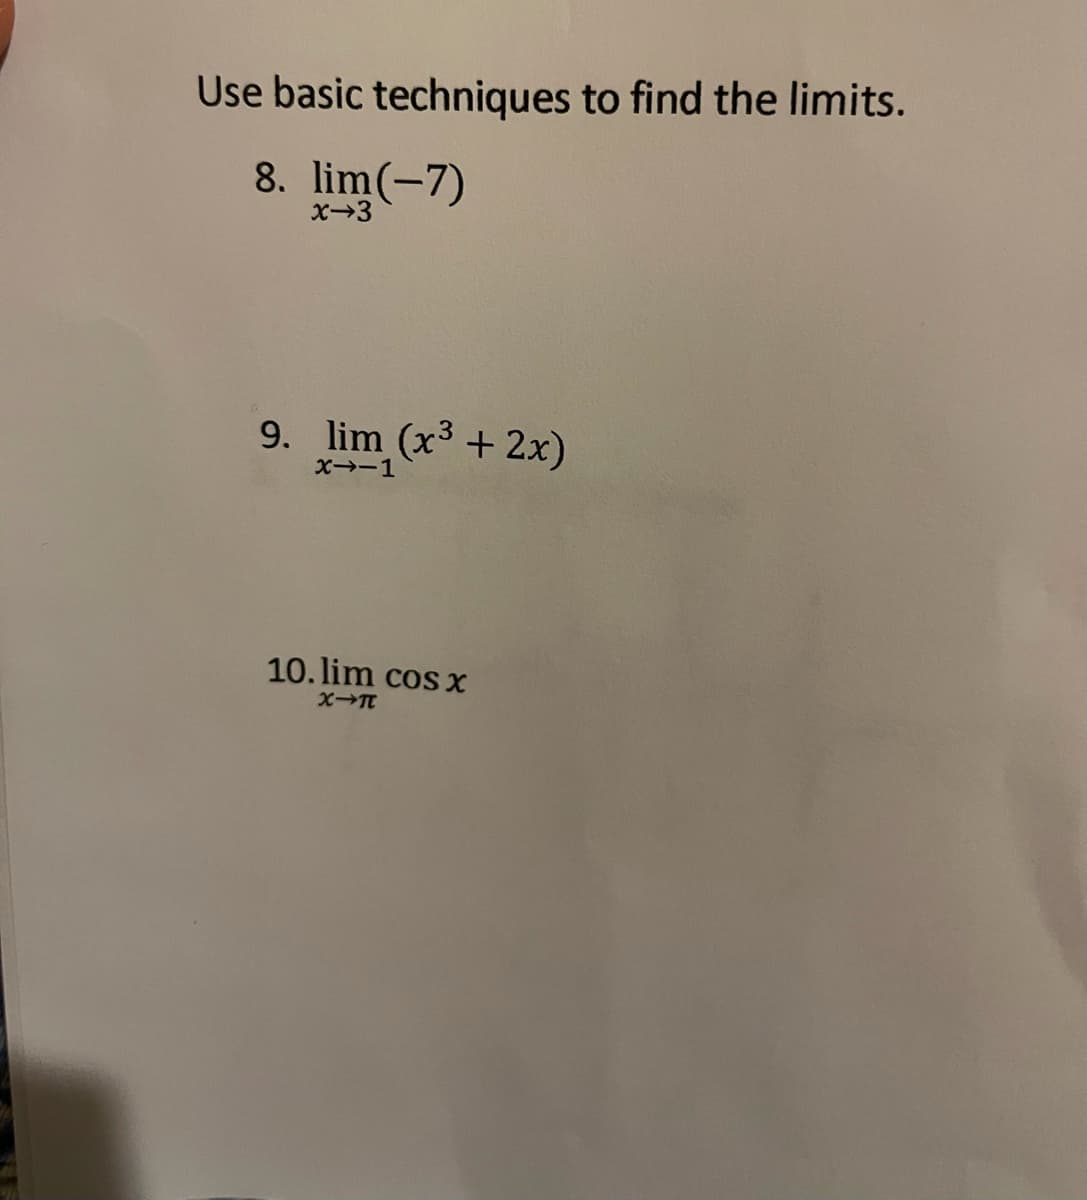 Use basic techniques to find the limits.
8. lim(-7)
X-3
9. lim (x³ + 2x)
X→-1
10. lim cos x
